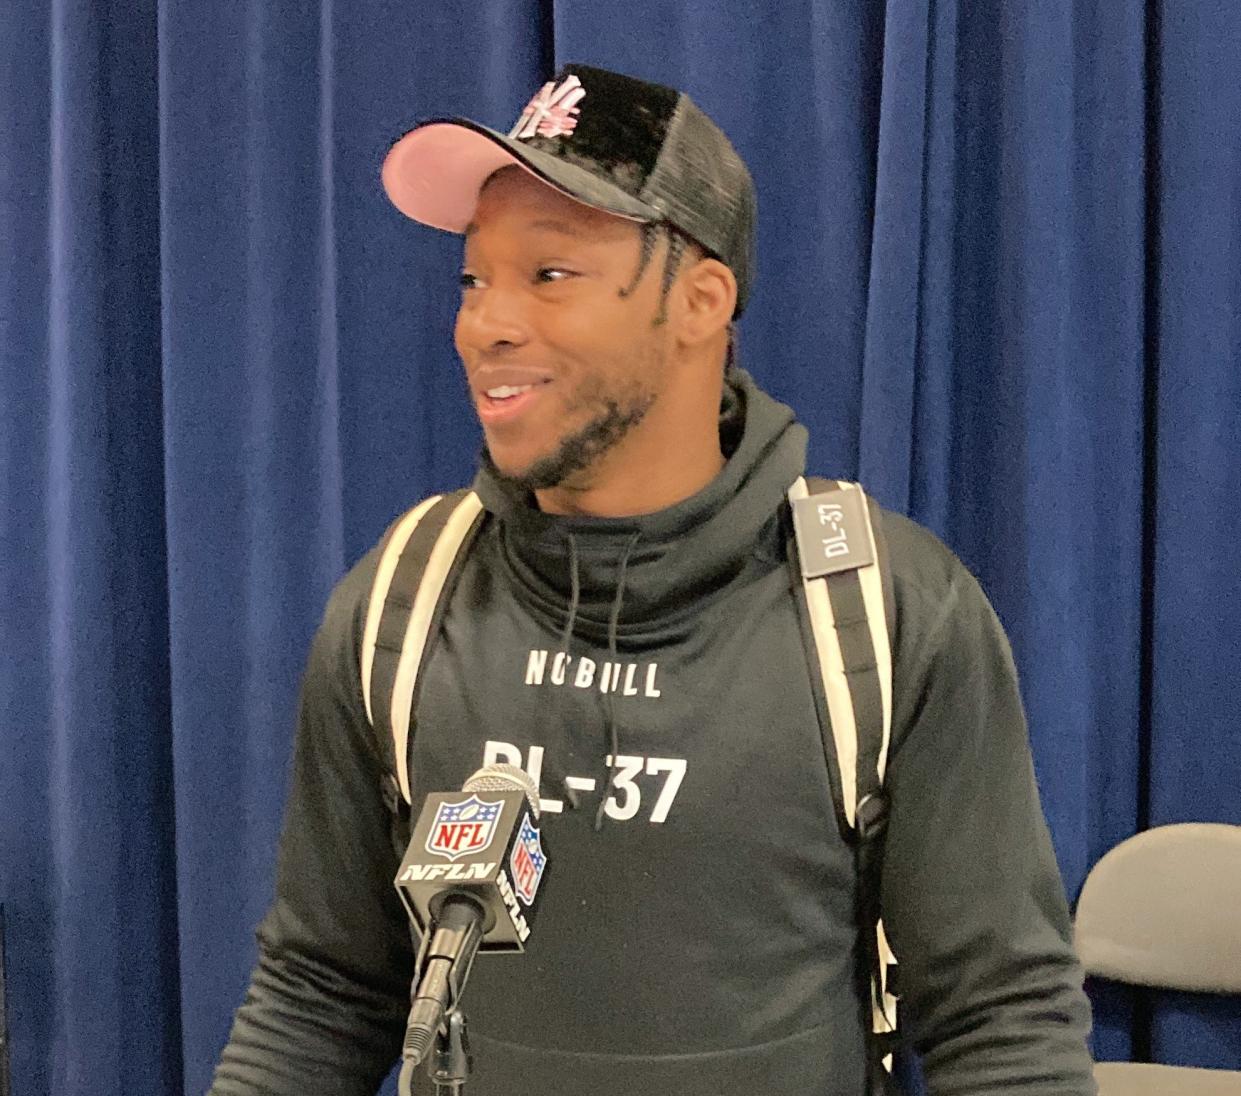 Bergen Catholic grad Javontae Jean-Baptiste, a defensive end for Notre Dame, talks to reporters at the NFL Scouting Combine in Indianapolis. The Rockland County (NY) native has met with the Giants and would embrace a homecoming if that were to happen in the pros.